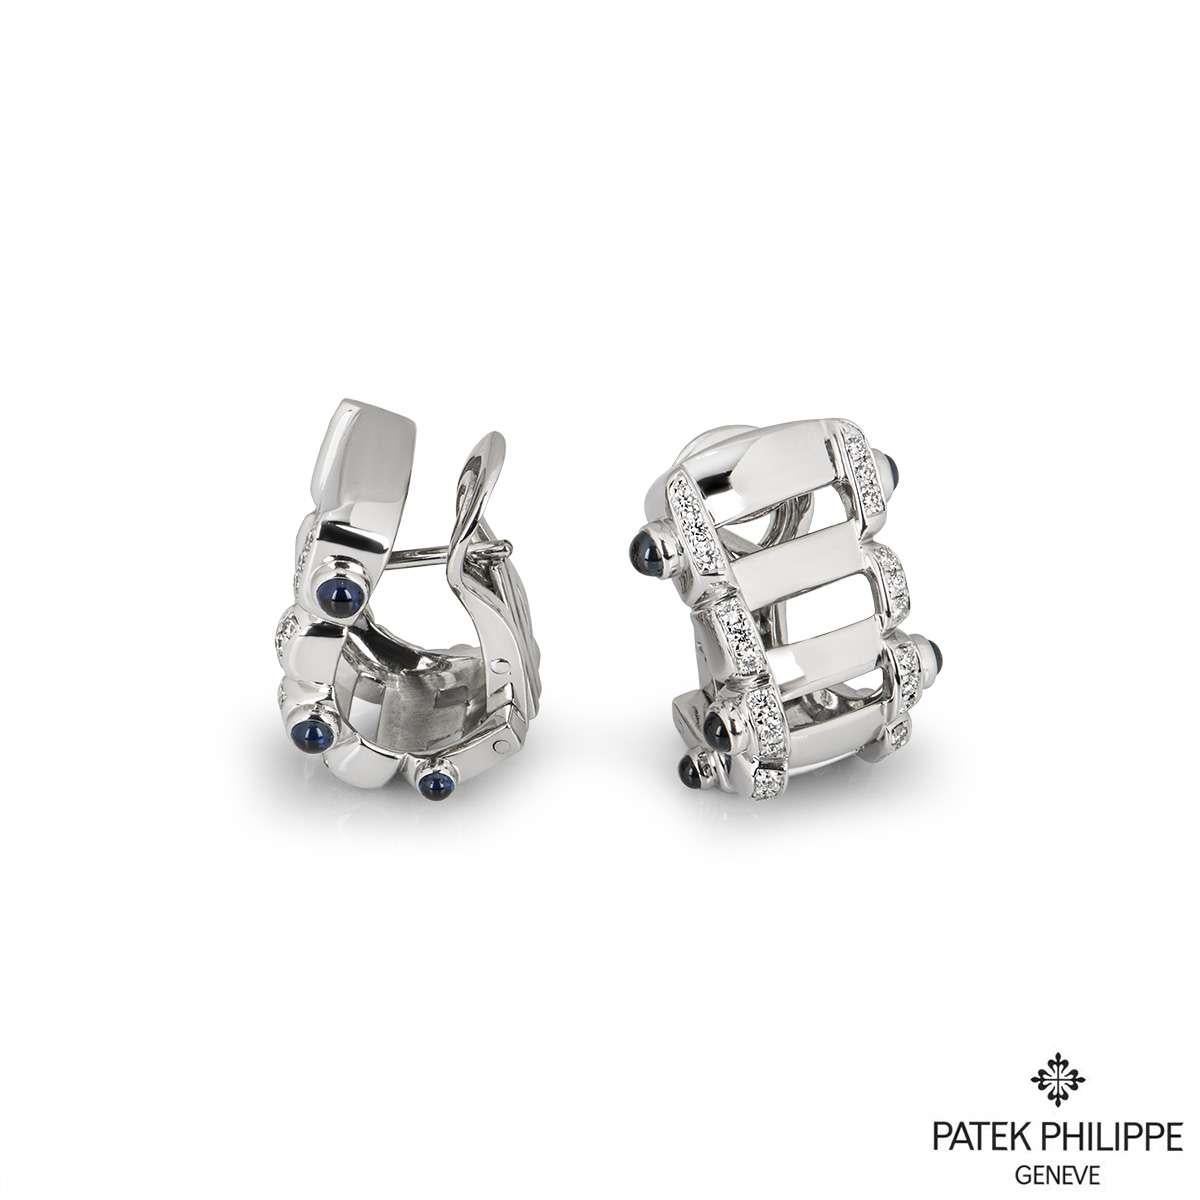 A pair of 18k white gold diamond earrings from the Twenty-4 collection by Patek Philippe. The earrings feature 60 round brilliant cut diamonds with a total weight of approximately 0.43ct. Set to the sides of the earrings are 12 cabochon blue